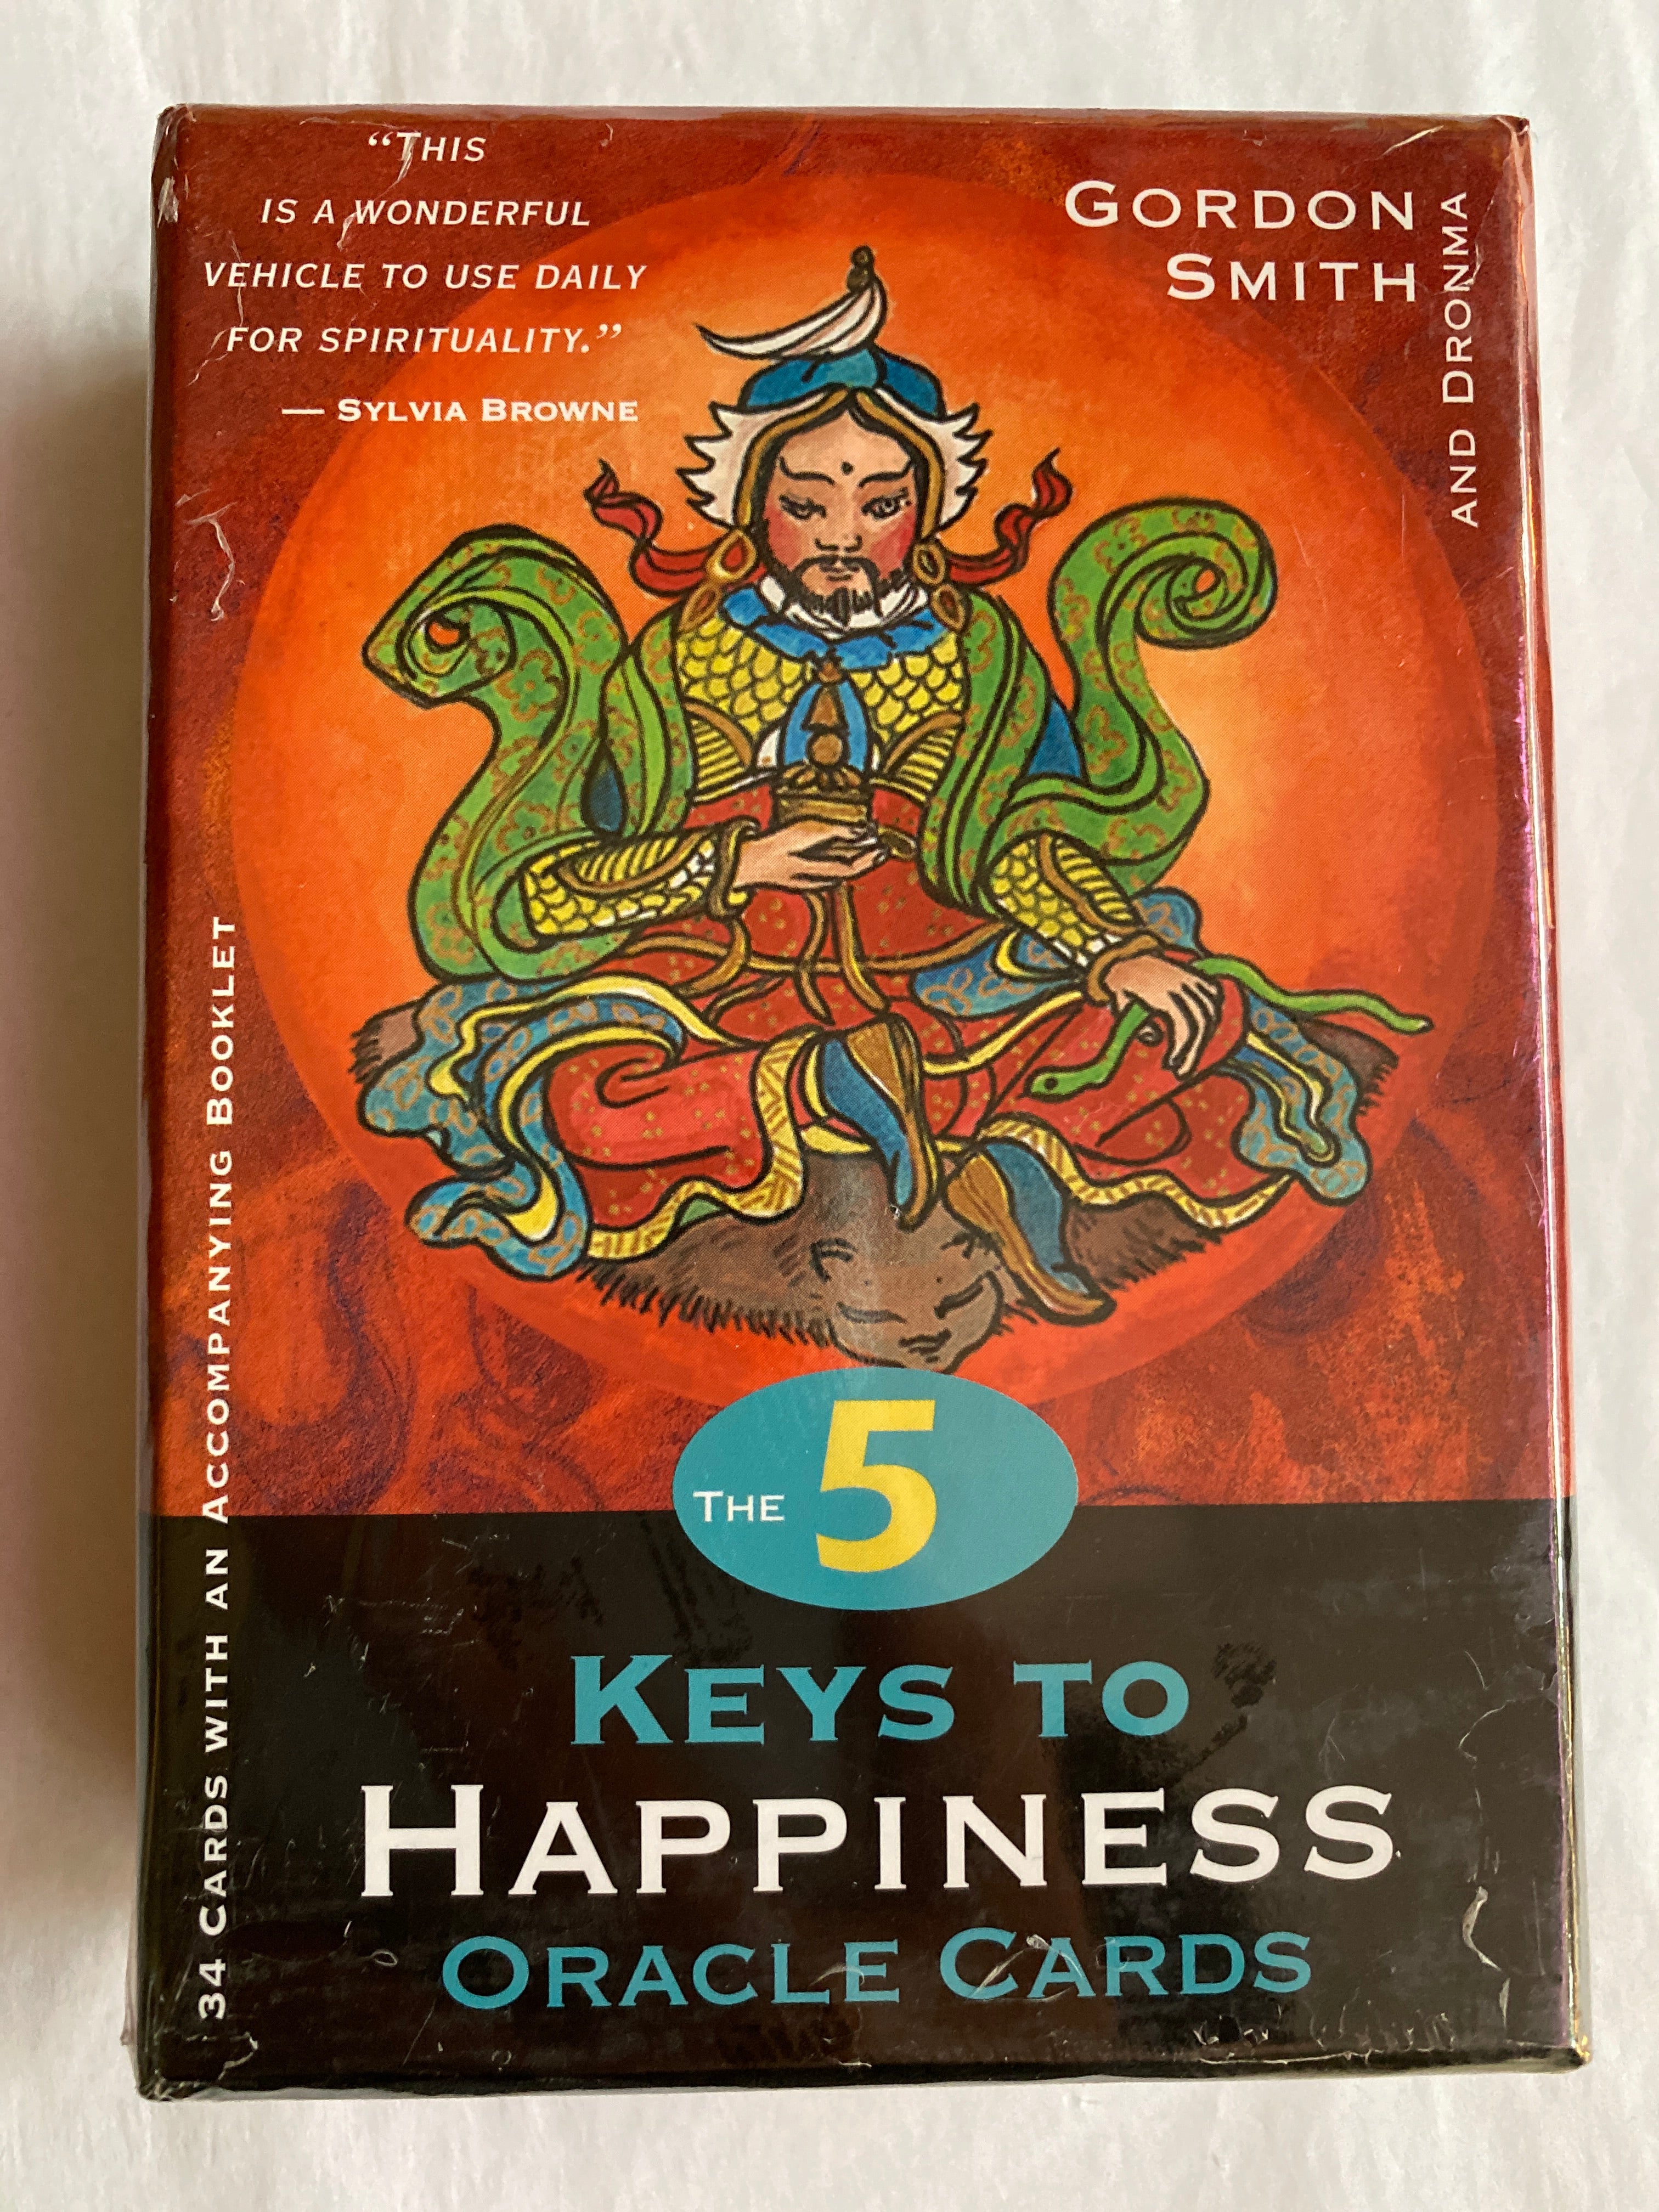 The 5 Keys to Happiness Oracle